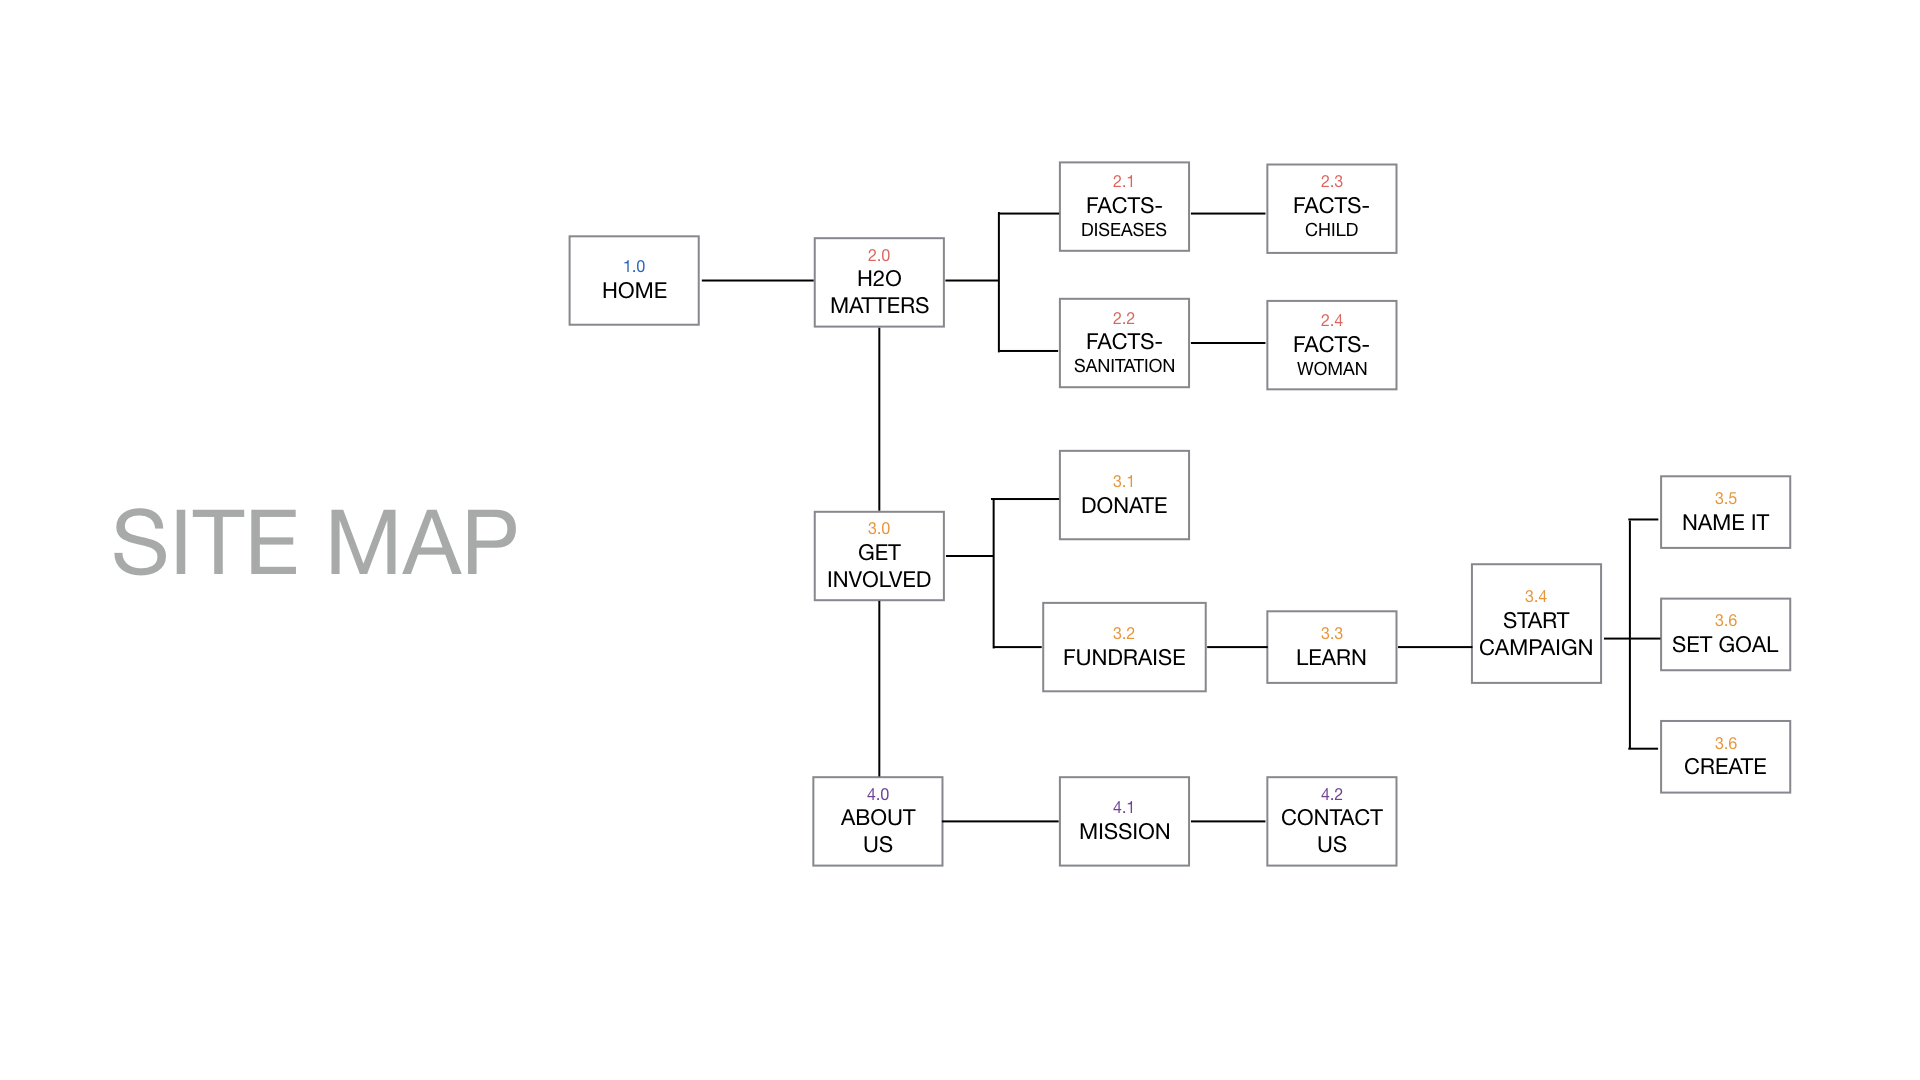 sitemap.001.png